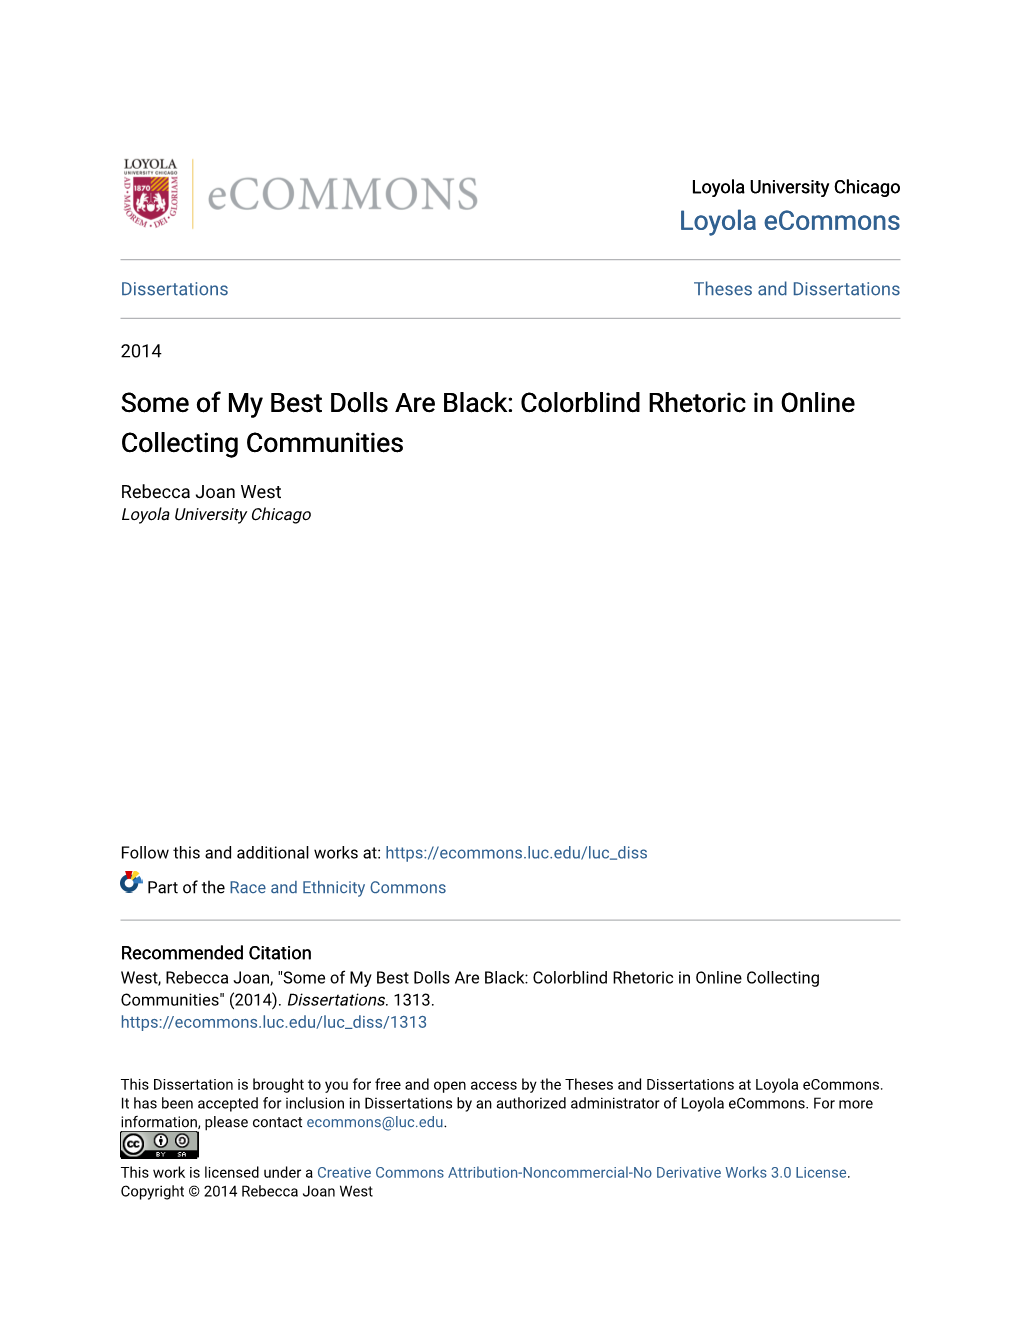 Some of My Best Dolls Are Black: Colorblind Rhetoric in Online Collecting Communities